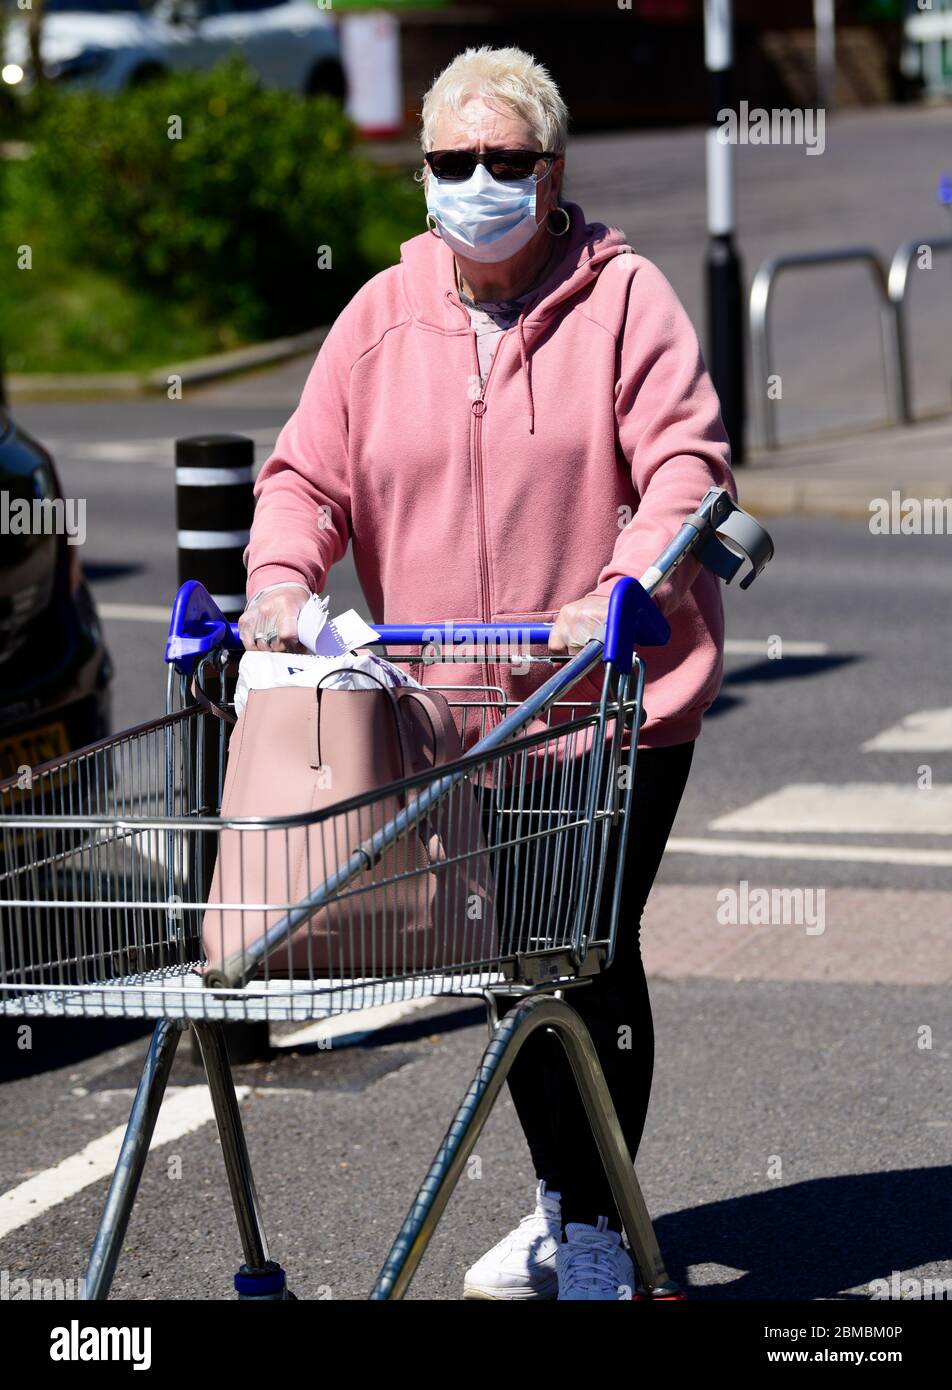 Elderly woman with shopping trolley en route to supermarket wearing face mask during the Coronavirus (COVID-19) pandemic, Haslemere, Surrey, UK. Stock Photo